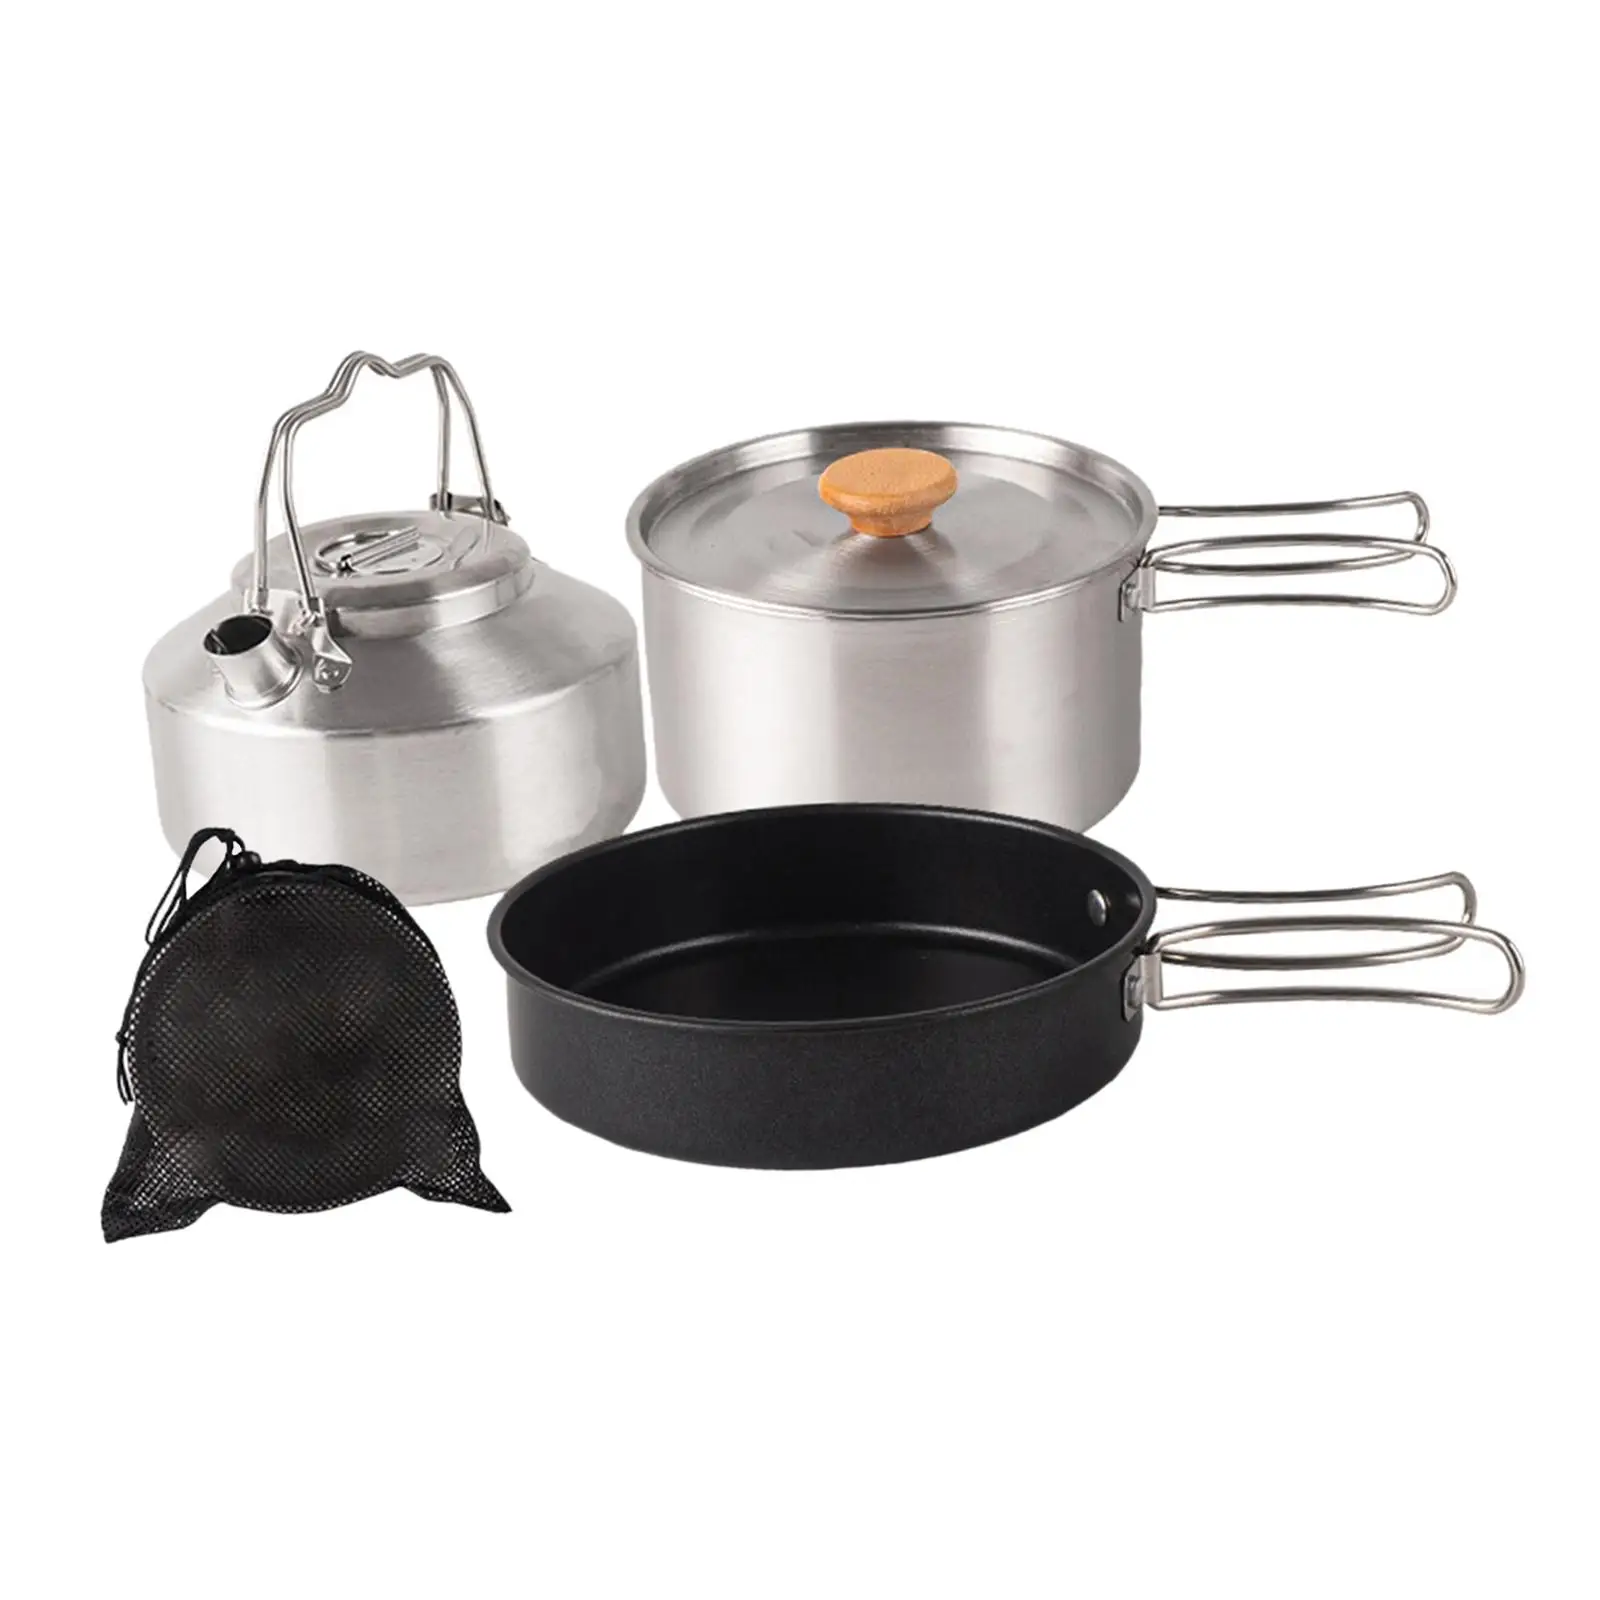 Camping Cookware Set Camping and Kettle for Backpacking BBQ Fishing